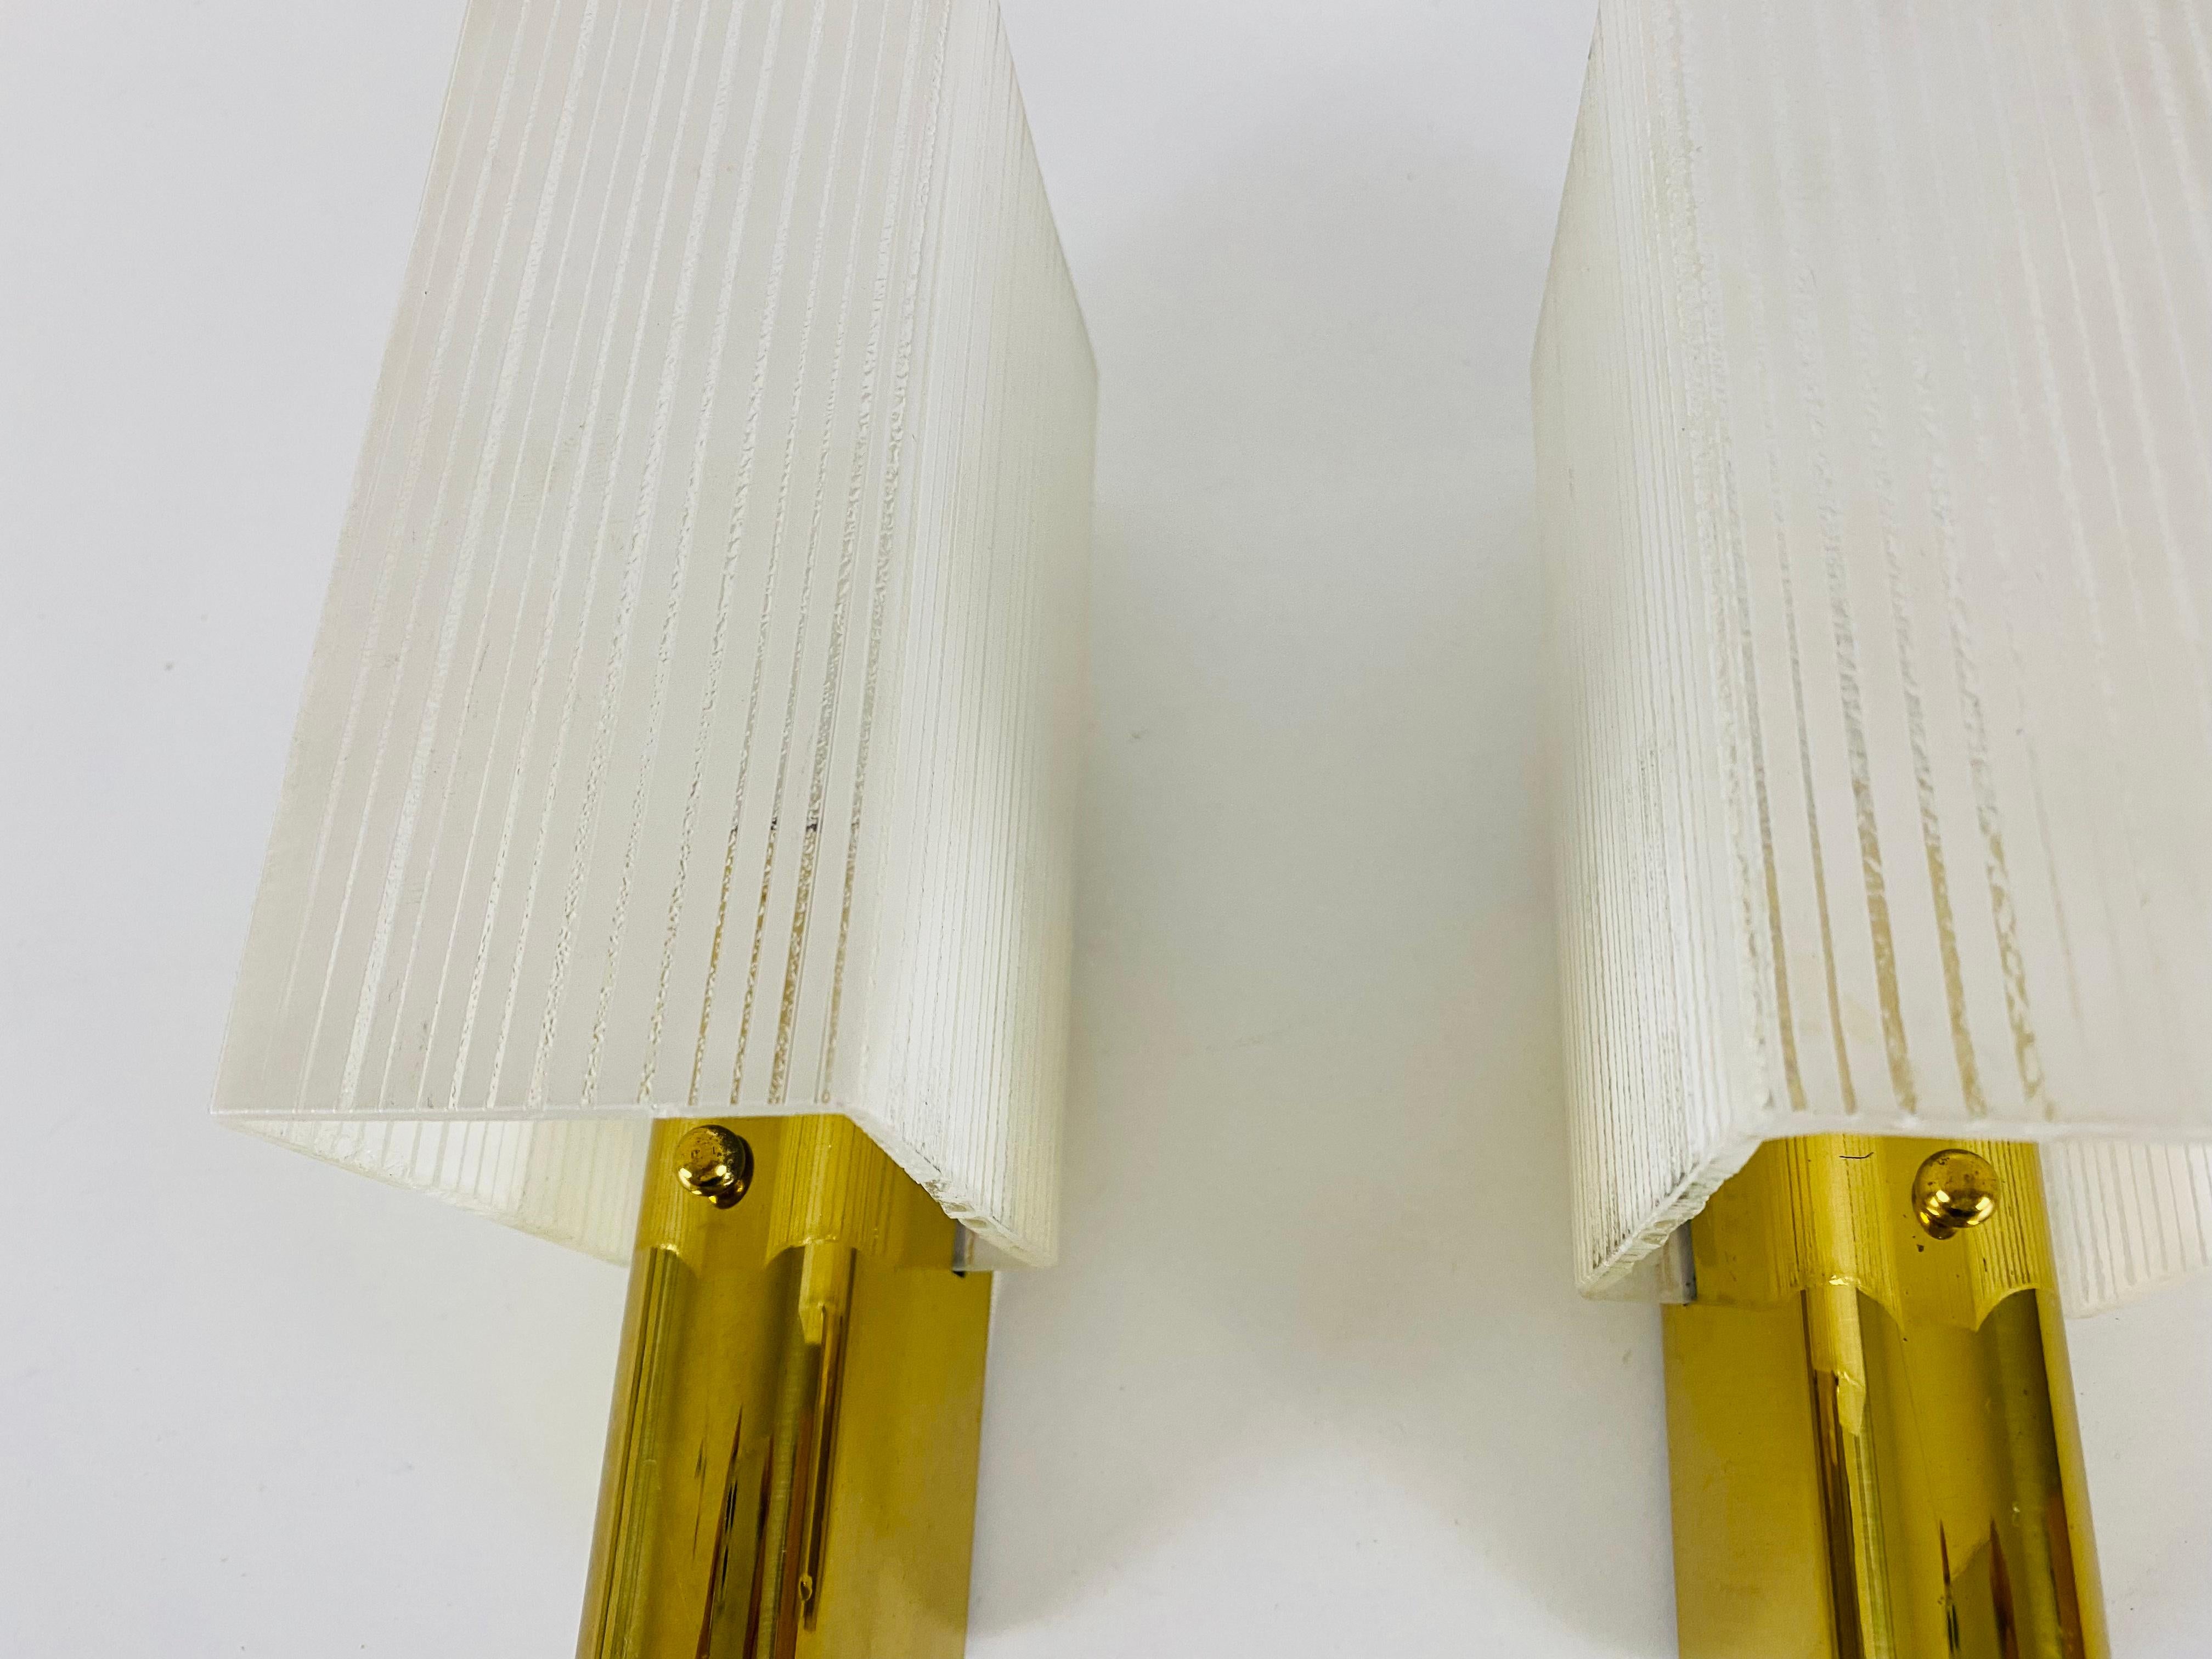 Pair of 2 Brass and Glass Sconces, 1960s, Germany For Sale 1